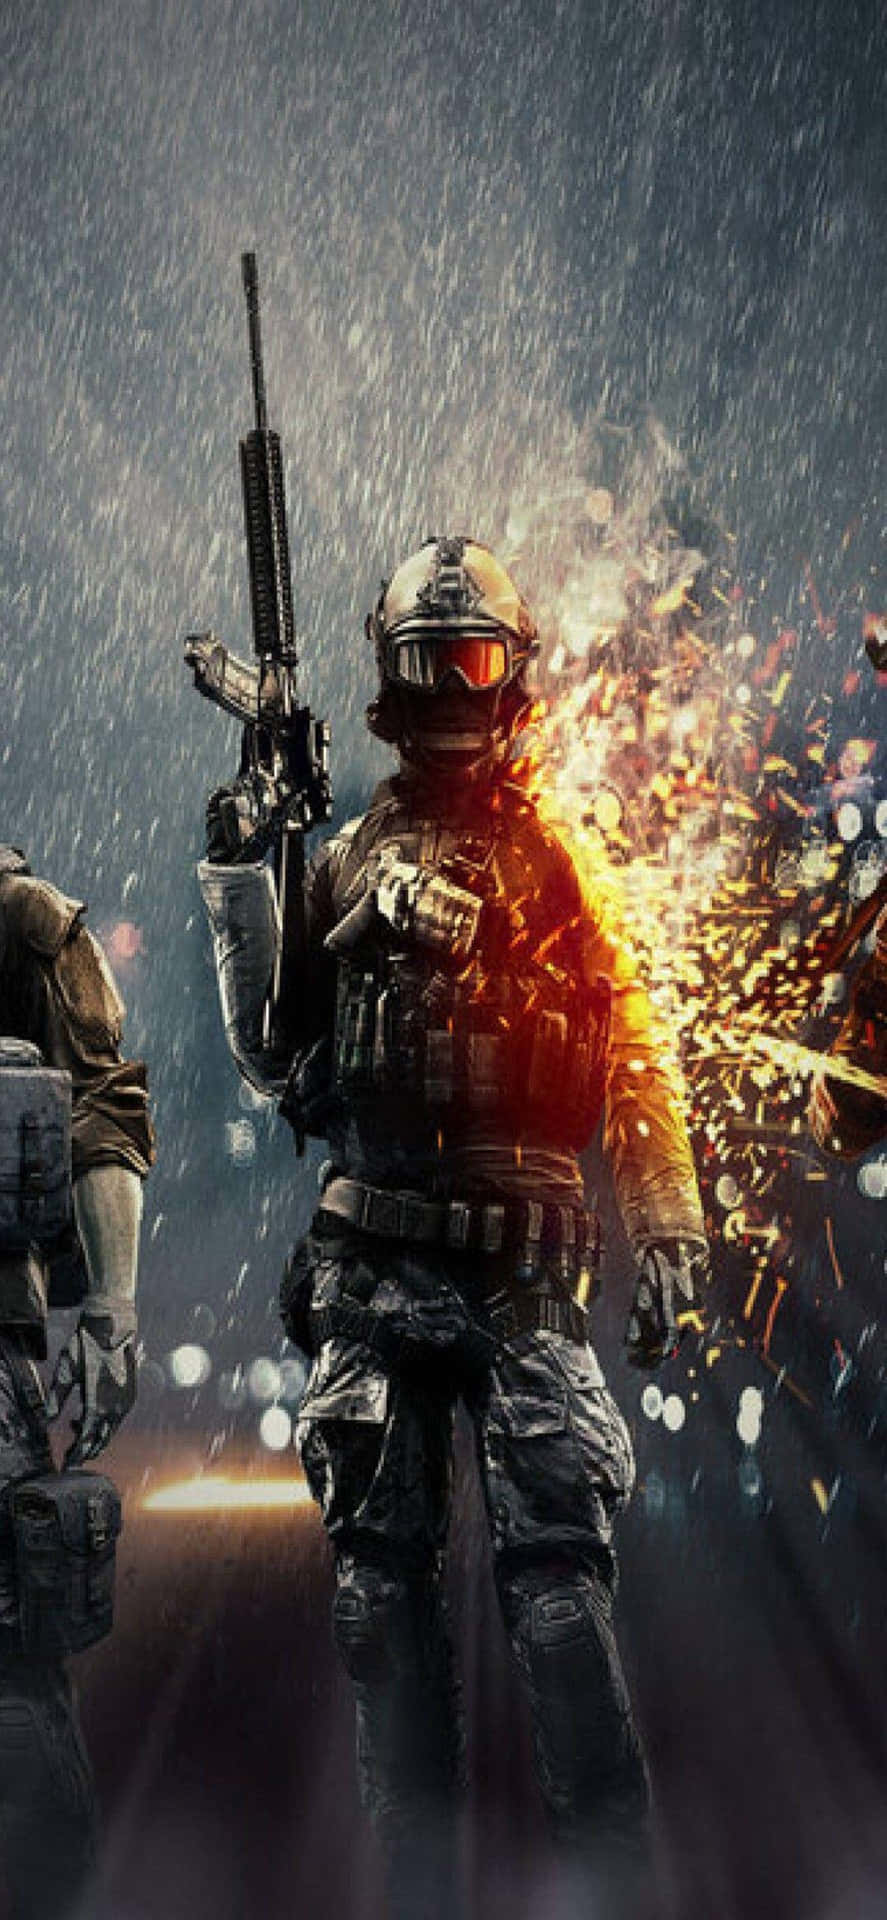 Experience Battlefield 4 in Stunning Quality on iPhone X